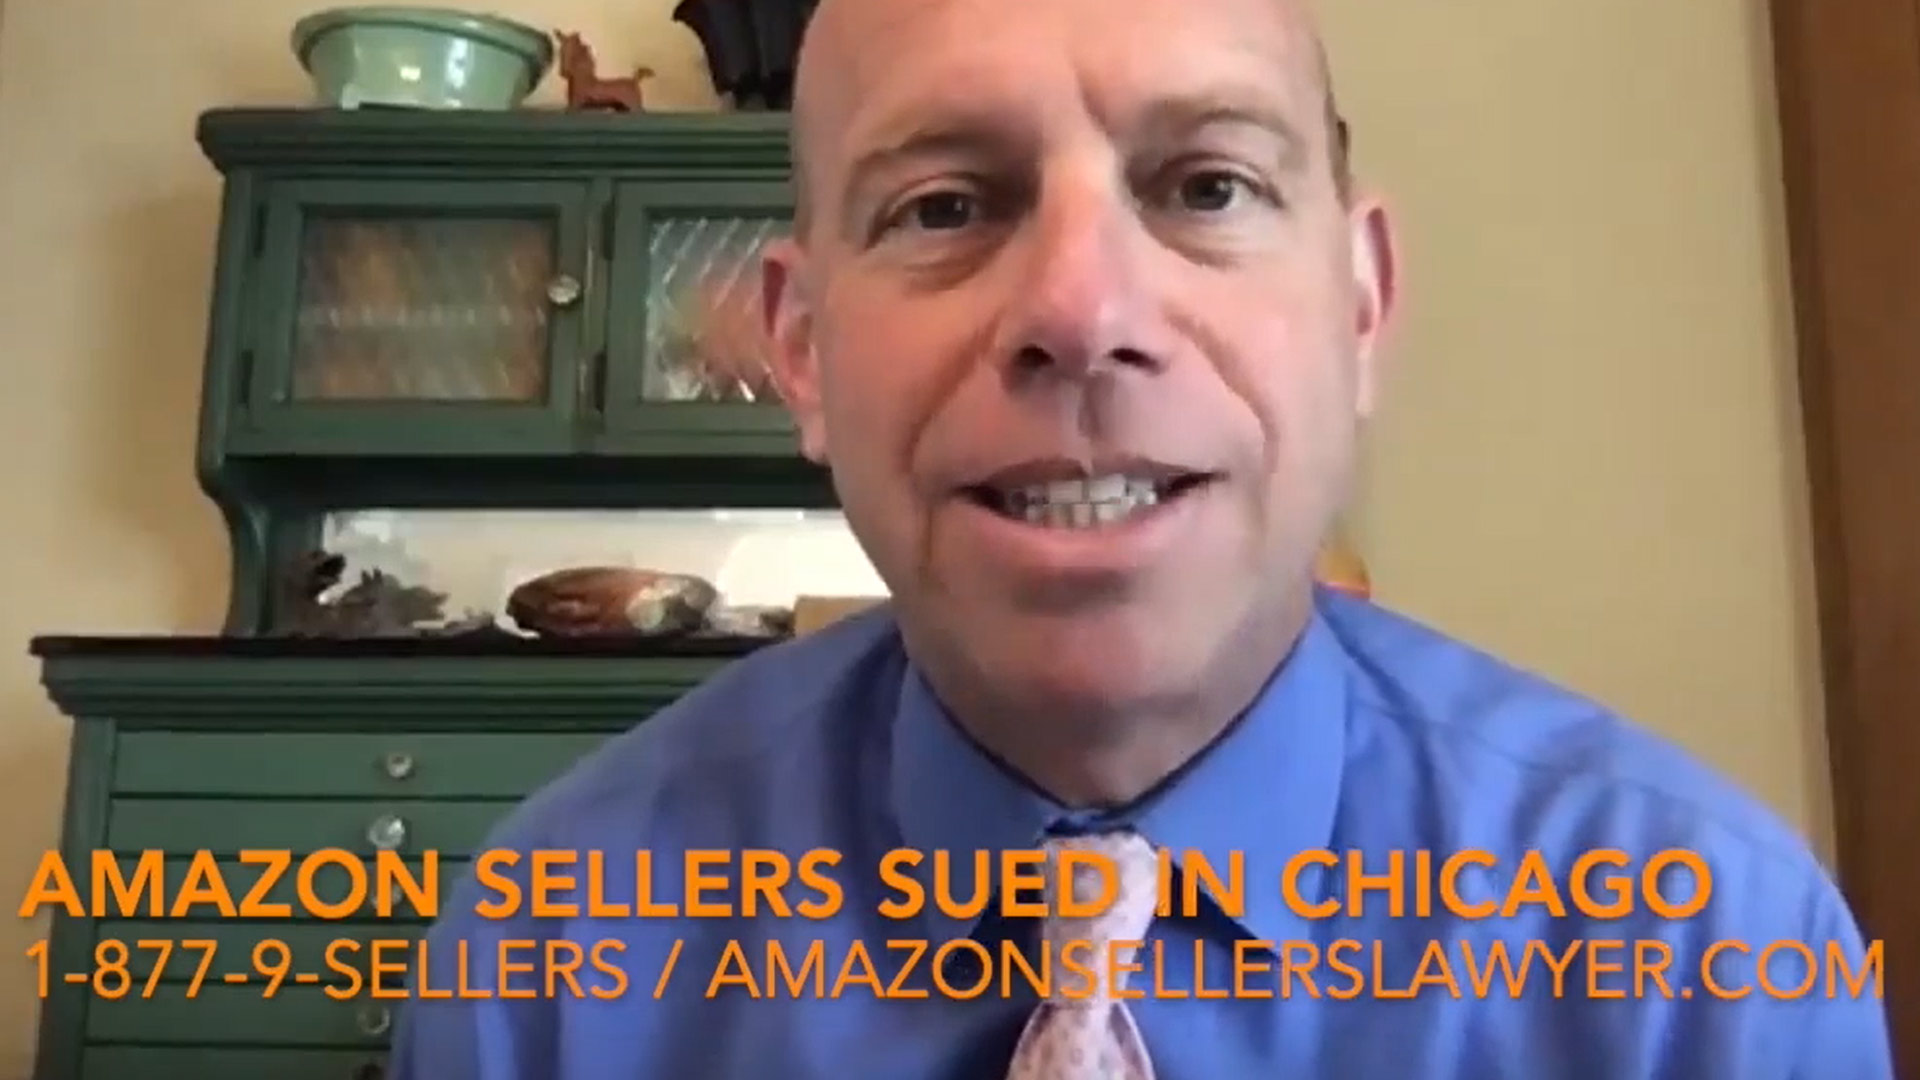 Amazon Sellers Who've Been Sued